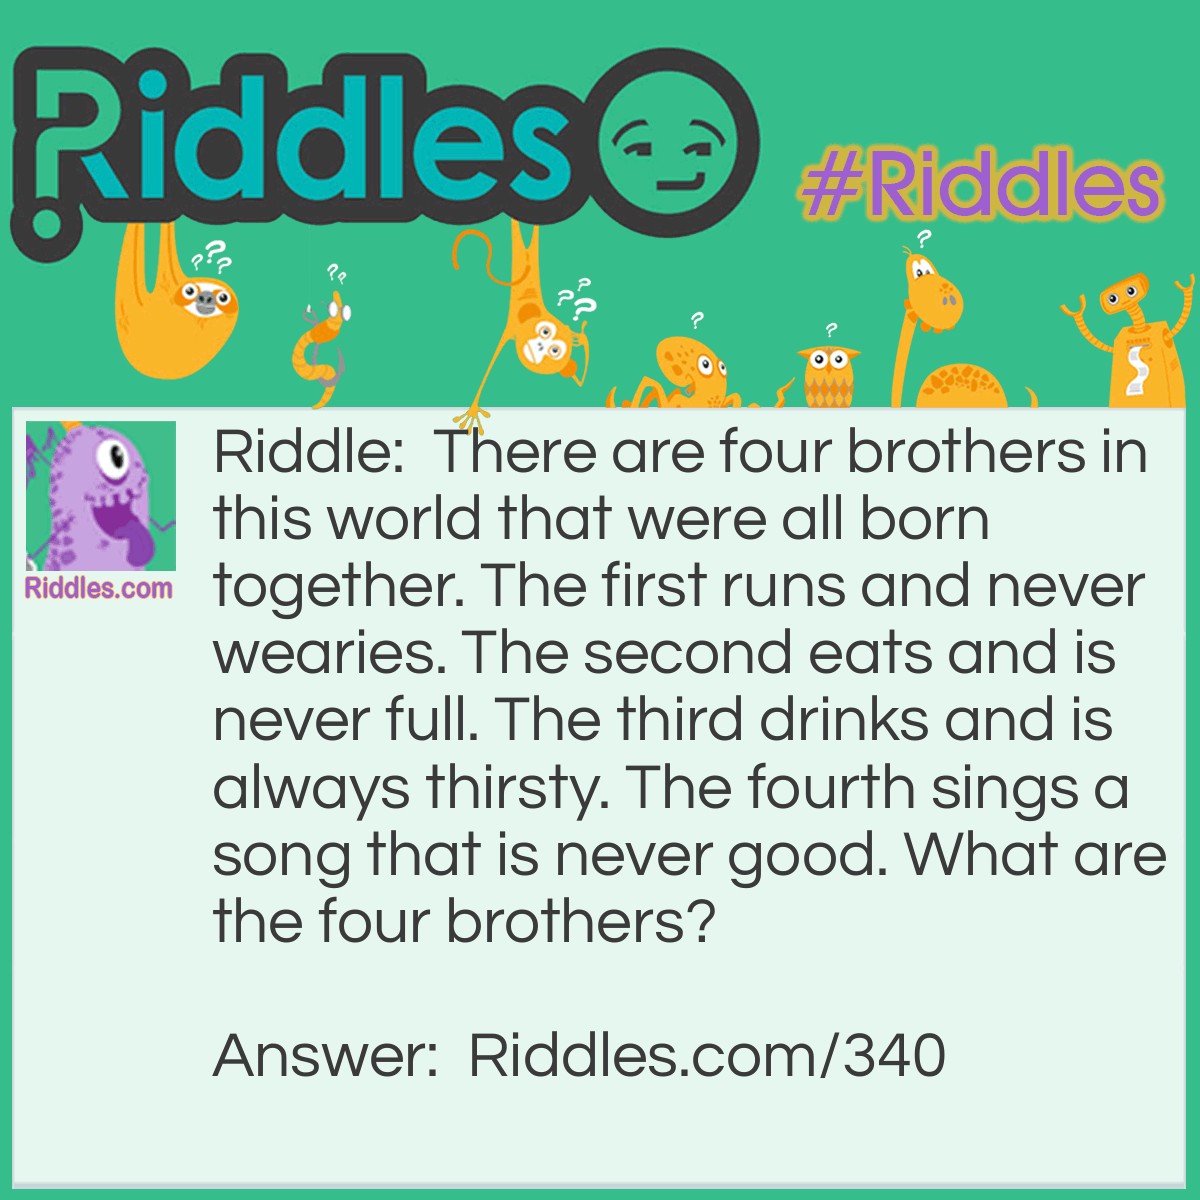 Riddle: There are four brothers in this world that were all born together. The first runs and never wearies. The second eats and is never full. The third drinks and is always thirsty. The fourth sings a song that is never good. What are the four brothers? Answer: Water, Fire, Earth, and Wind.